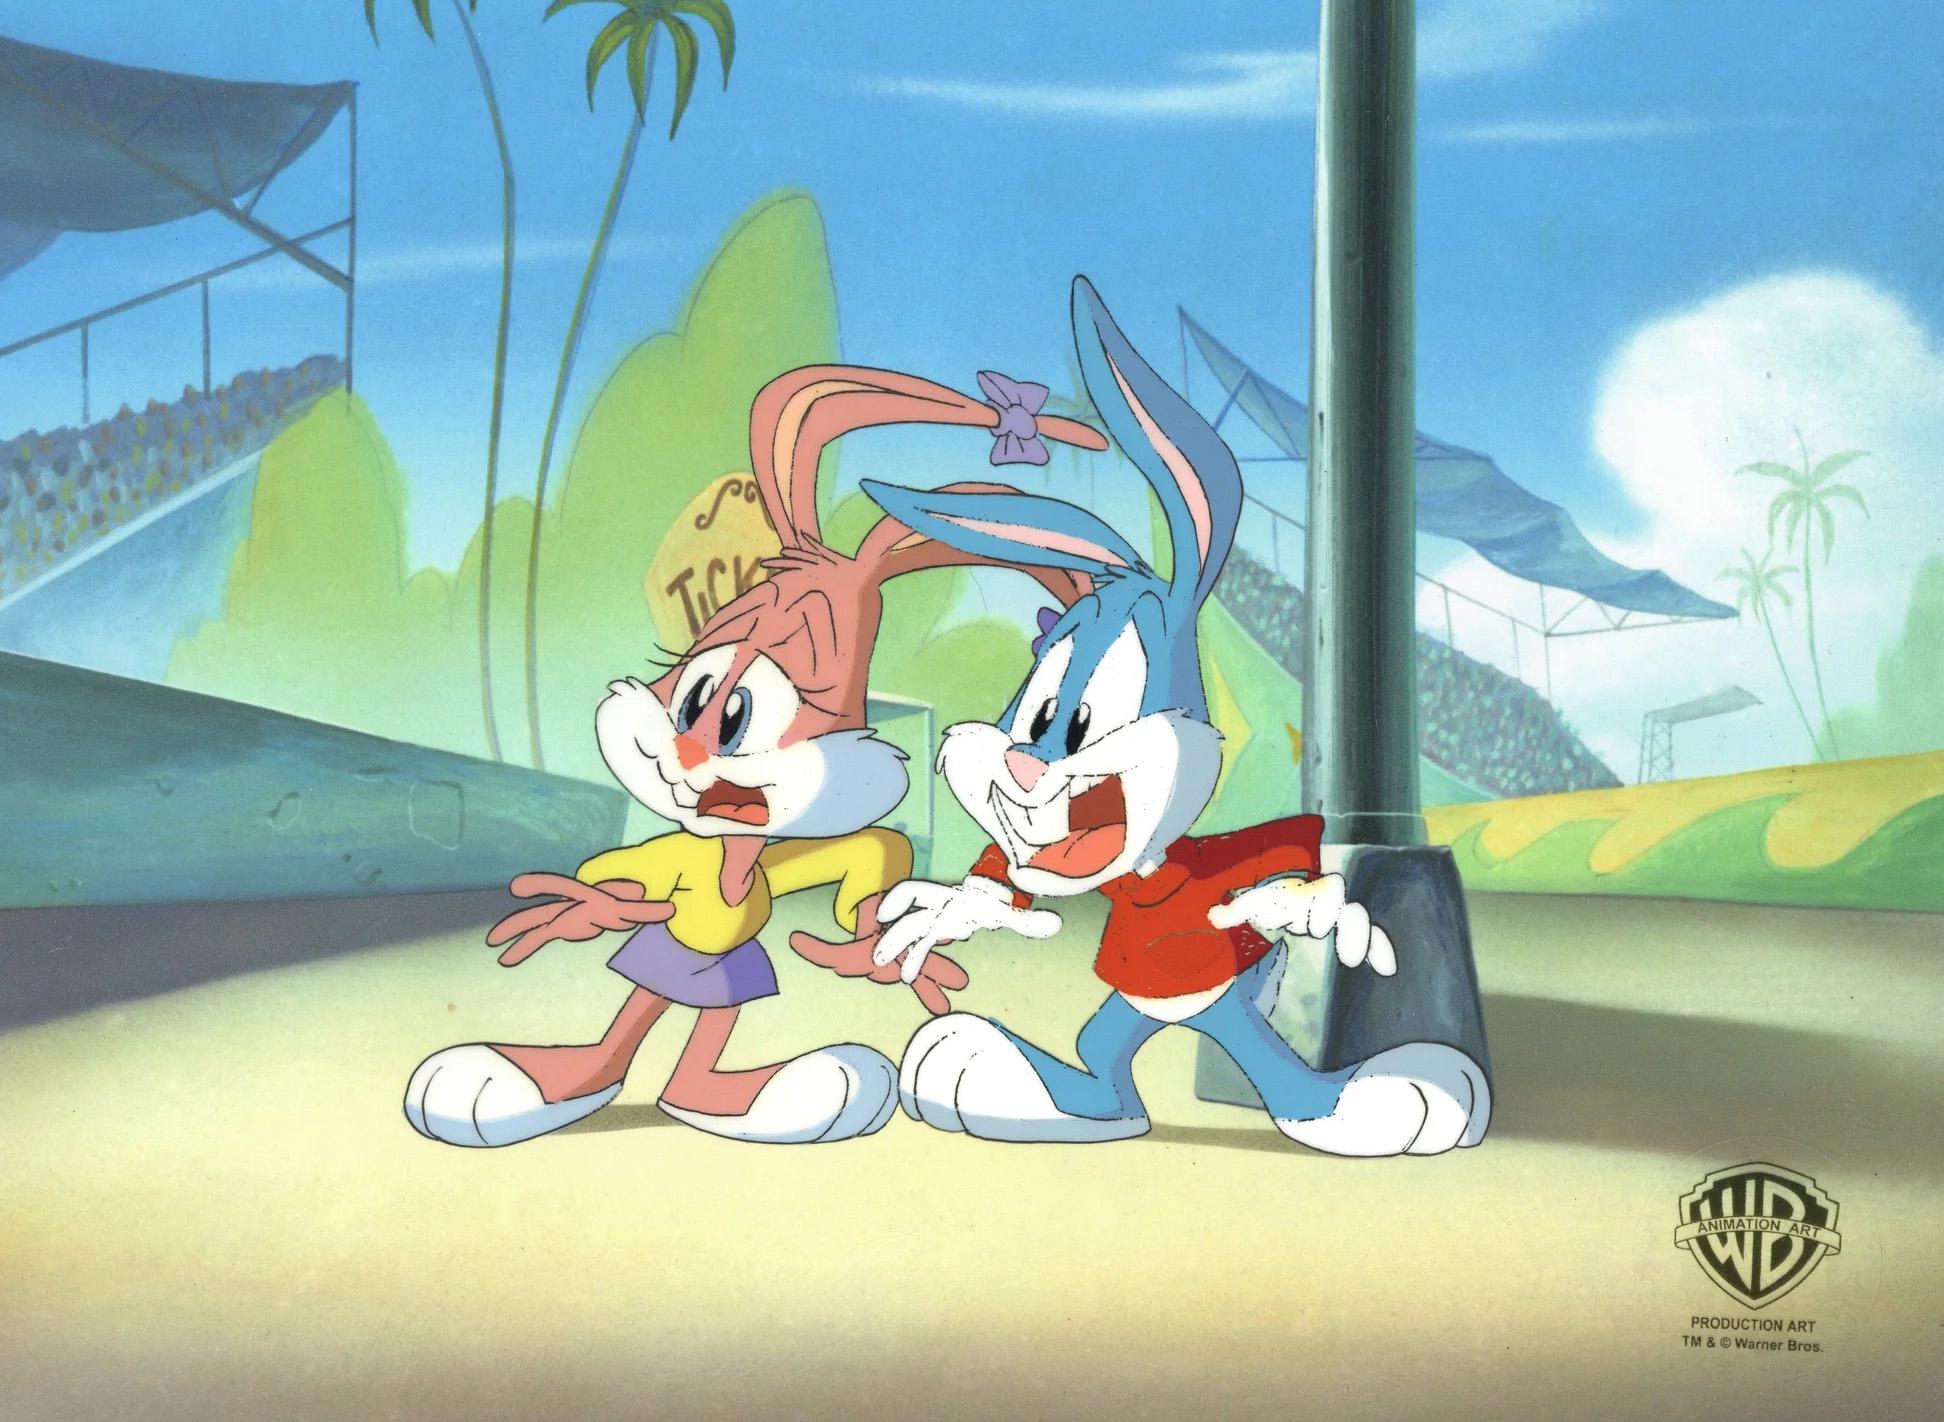 Tiny Toons Adventures Original Production Cel: Babs and Buster Bunny - Art by Warner Bros. Studio Artists